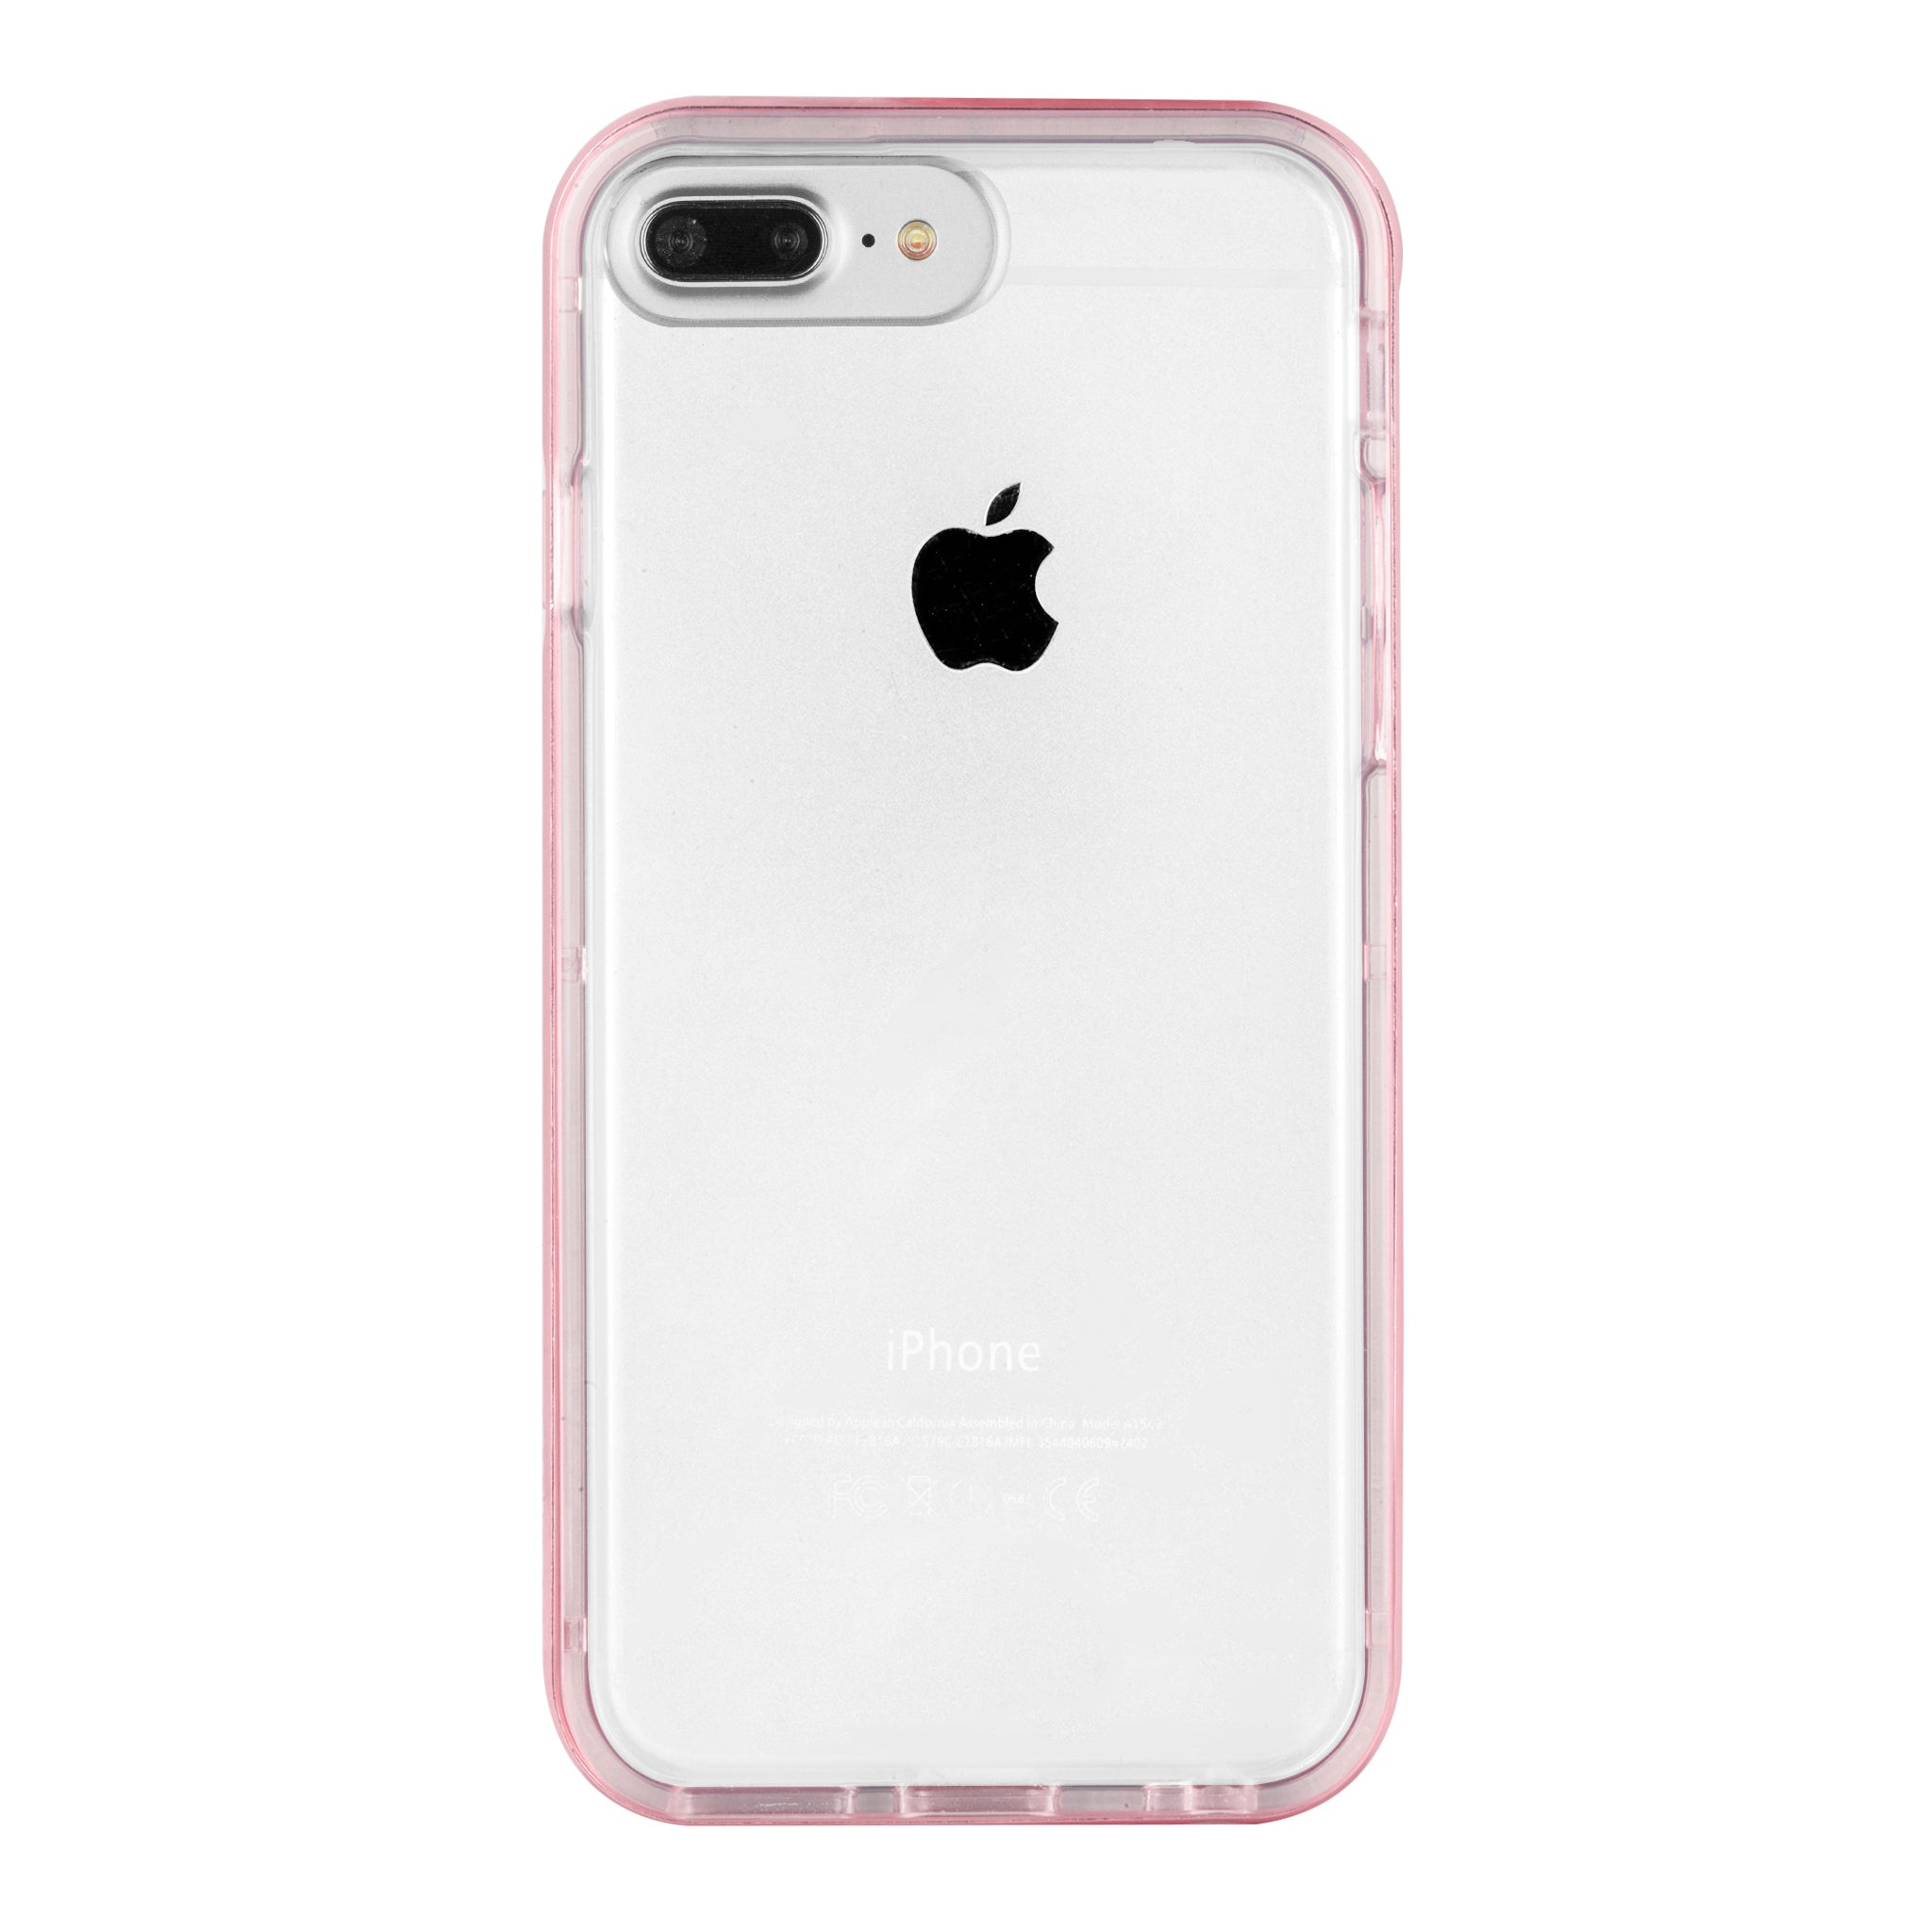 Cylo - Drop-Shield Case for Apple iPhone 7 Plus - Pink, CY-0694